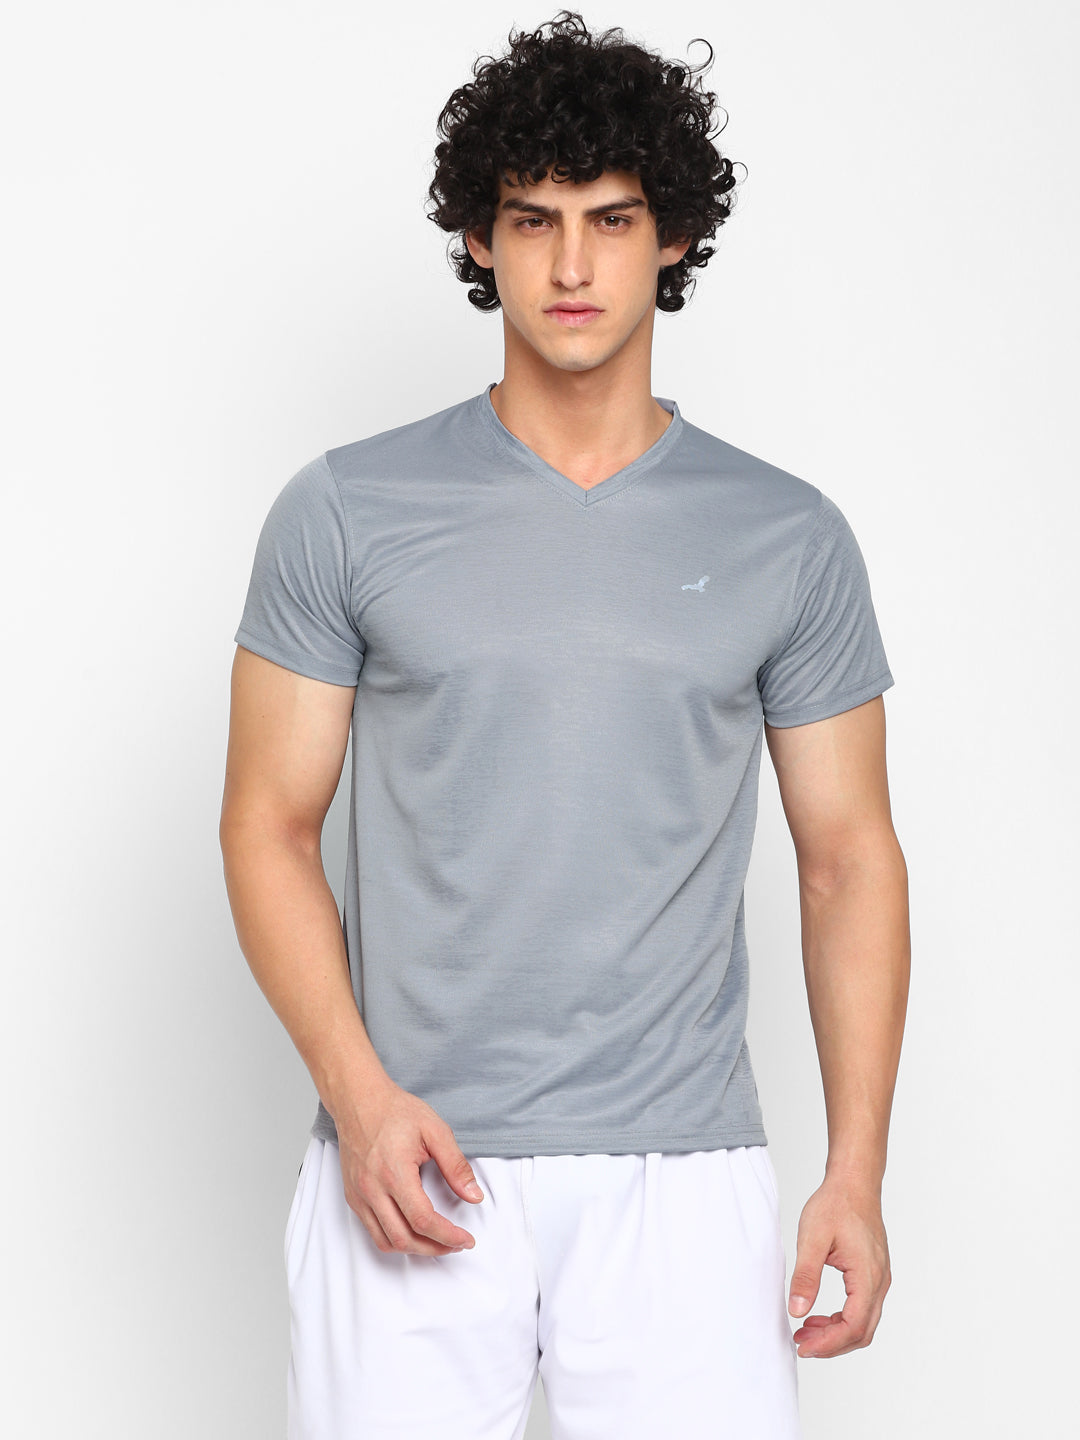 Sports T Shirts for Men